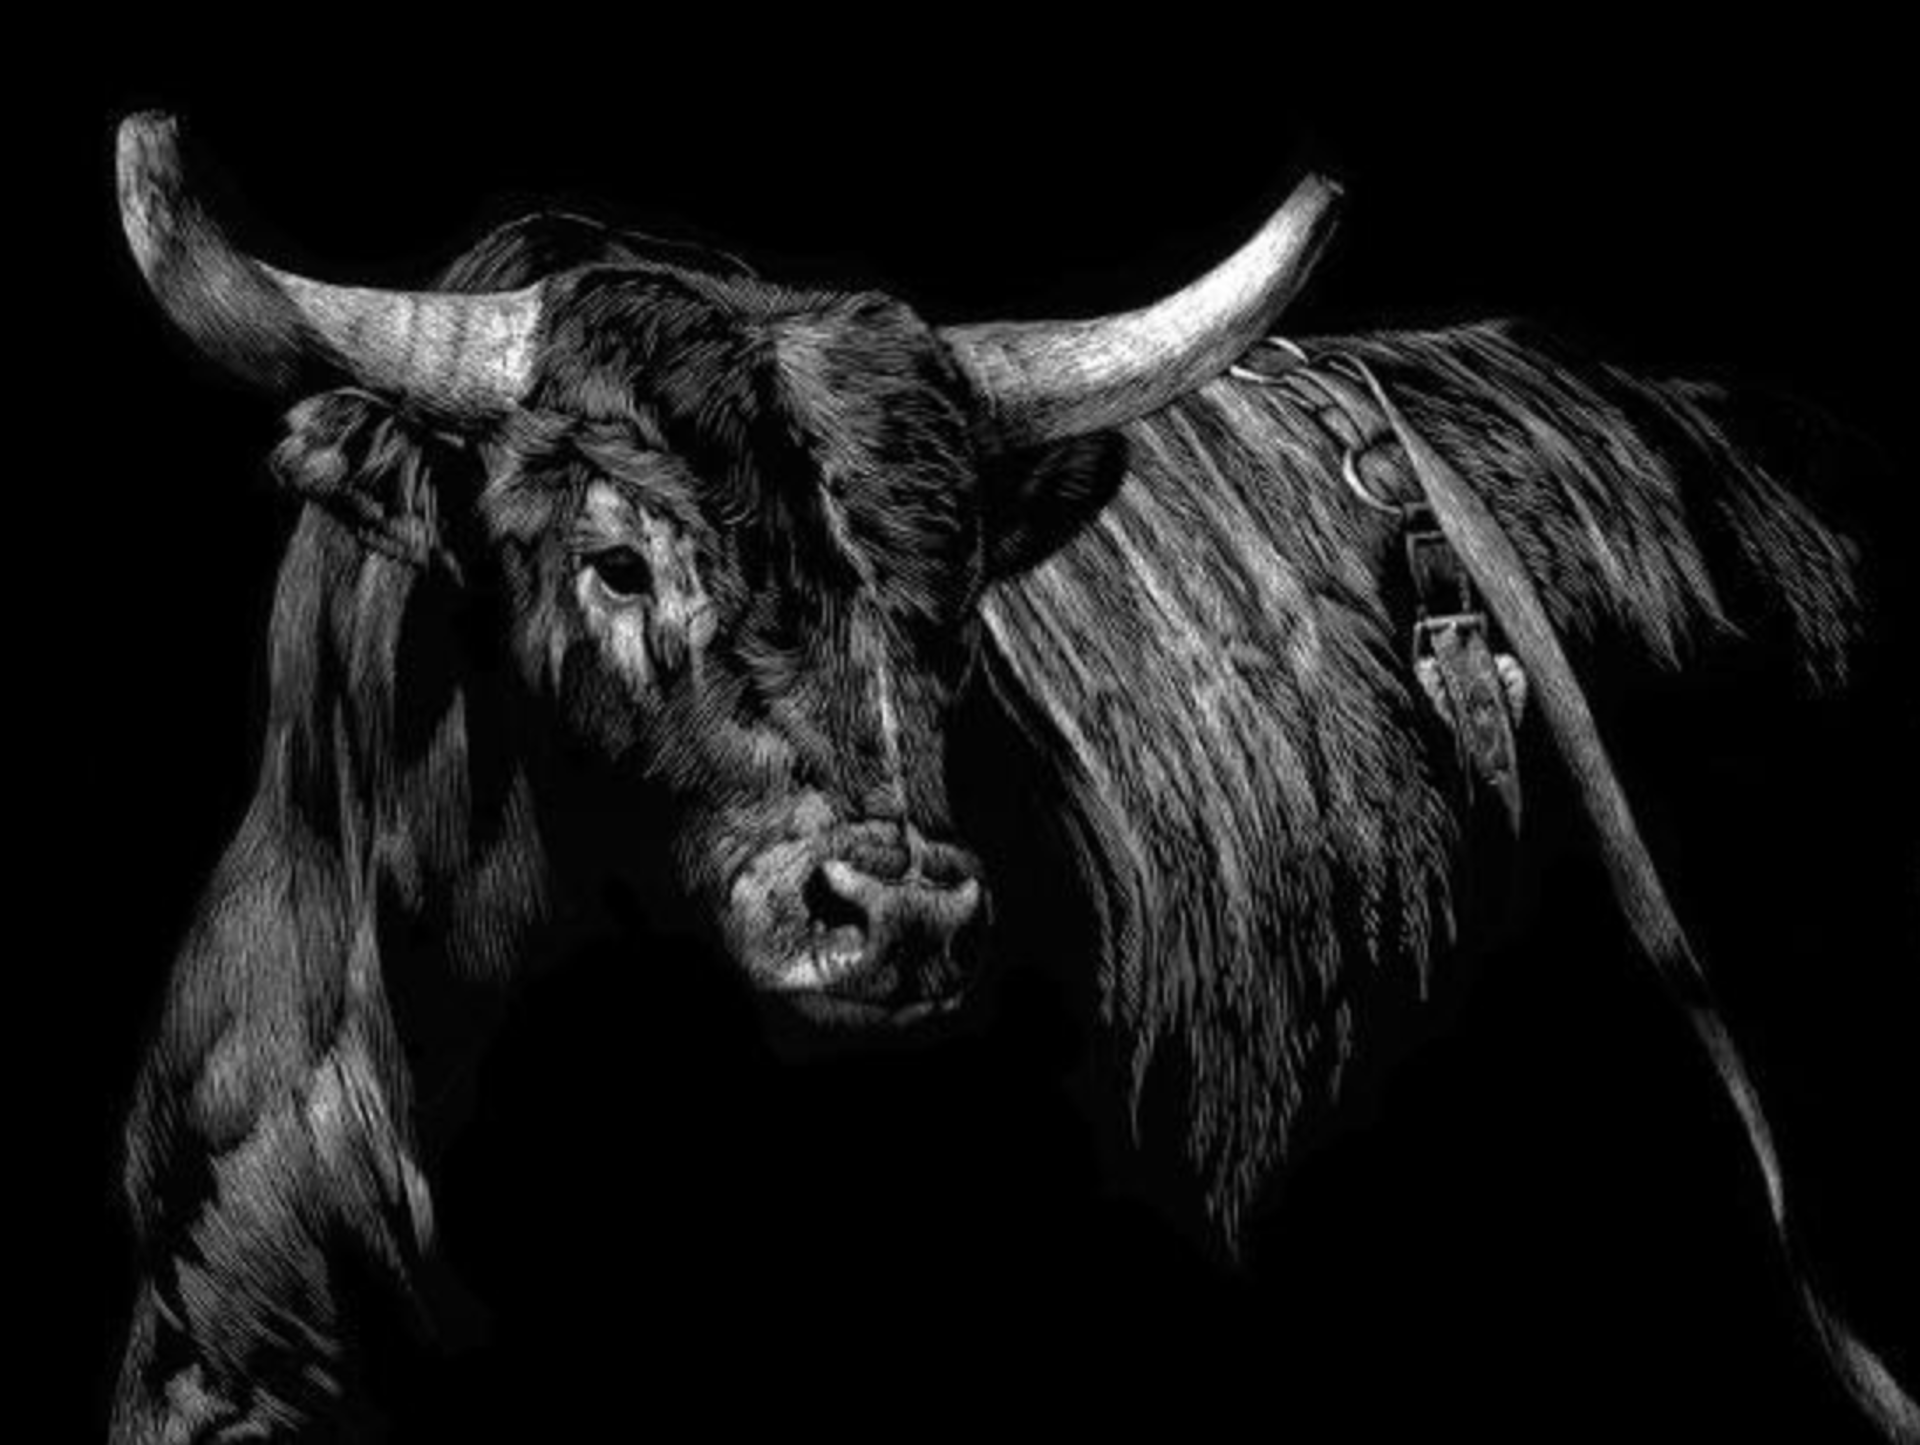 BRINDLE RODEO BULL by Julie Chapman